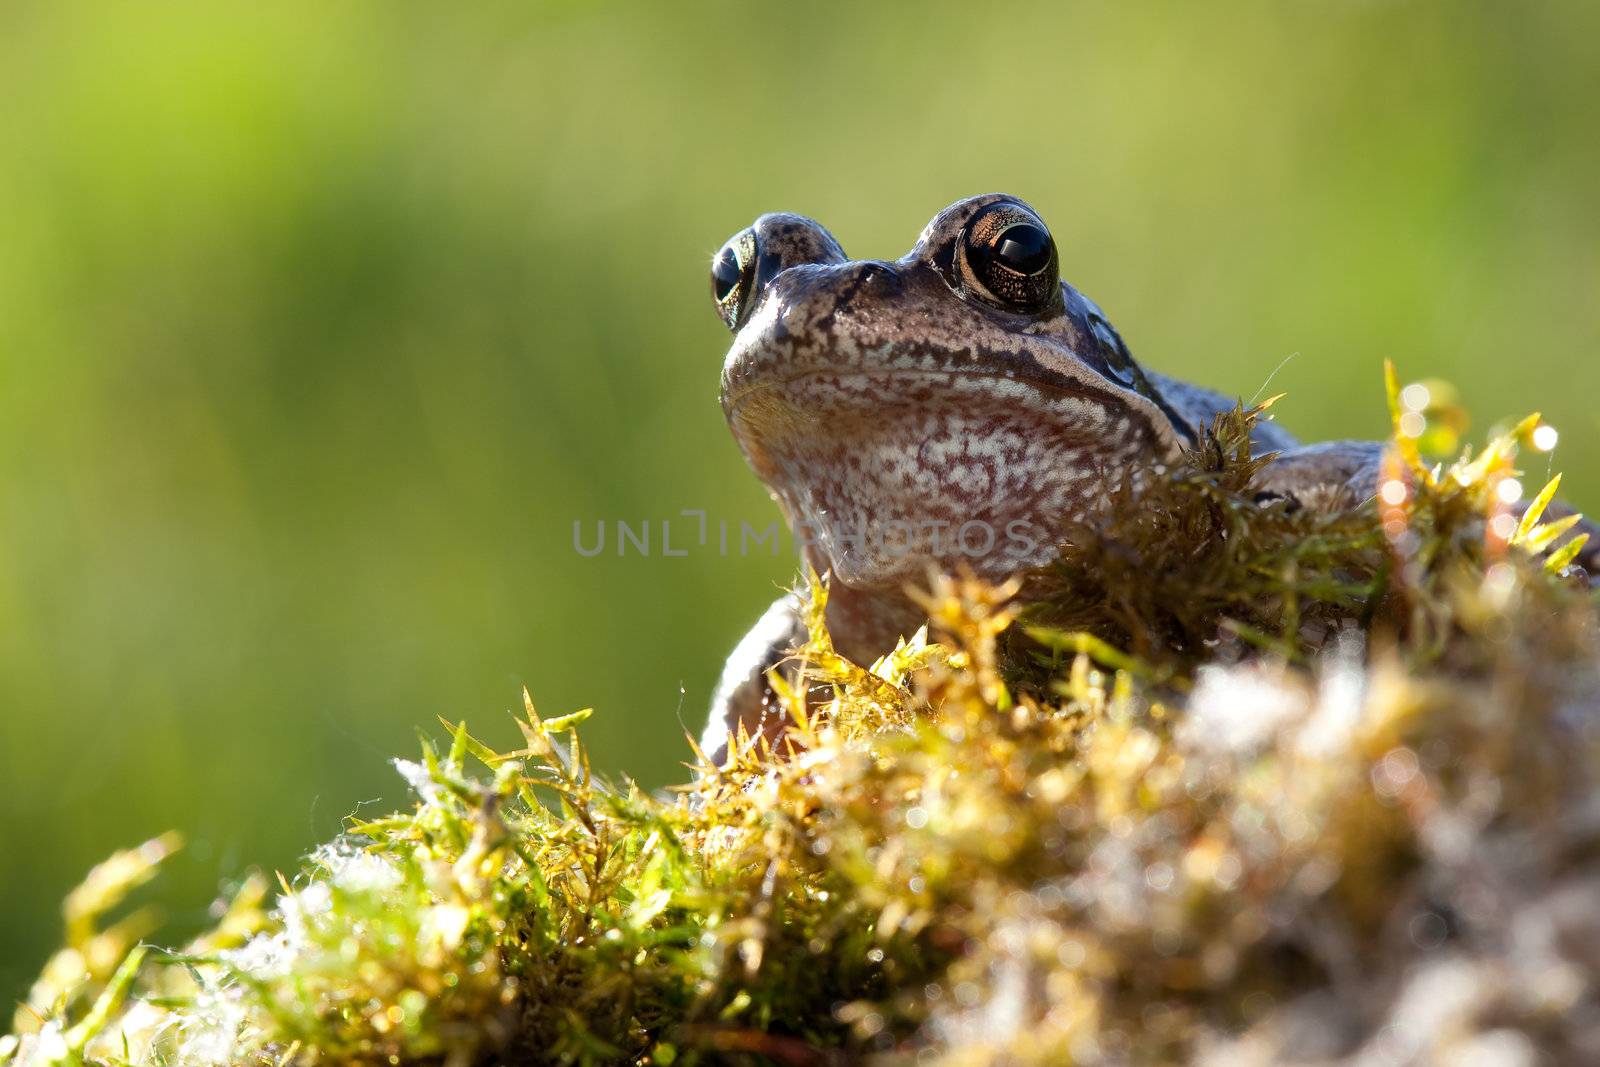 Frog in moss by Lincikas